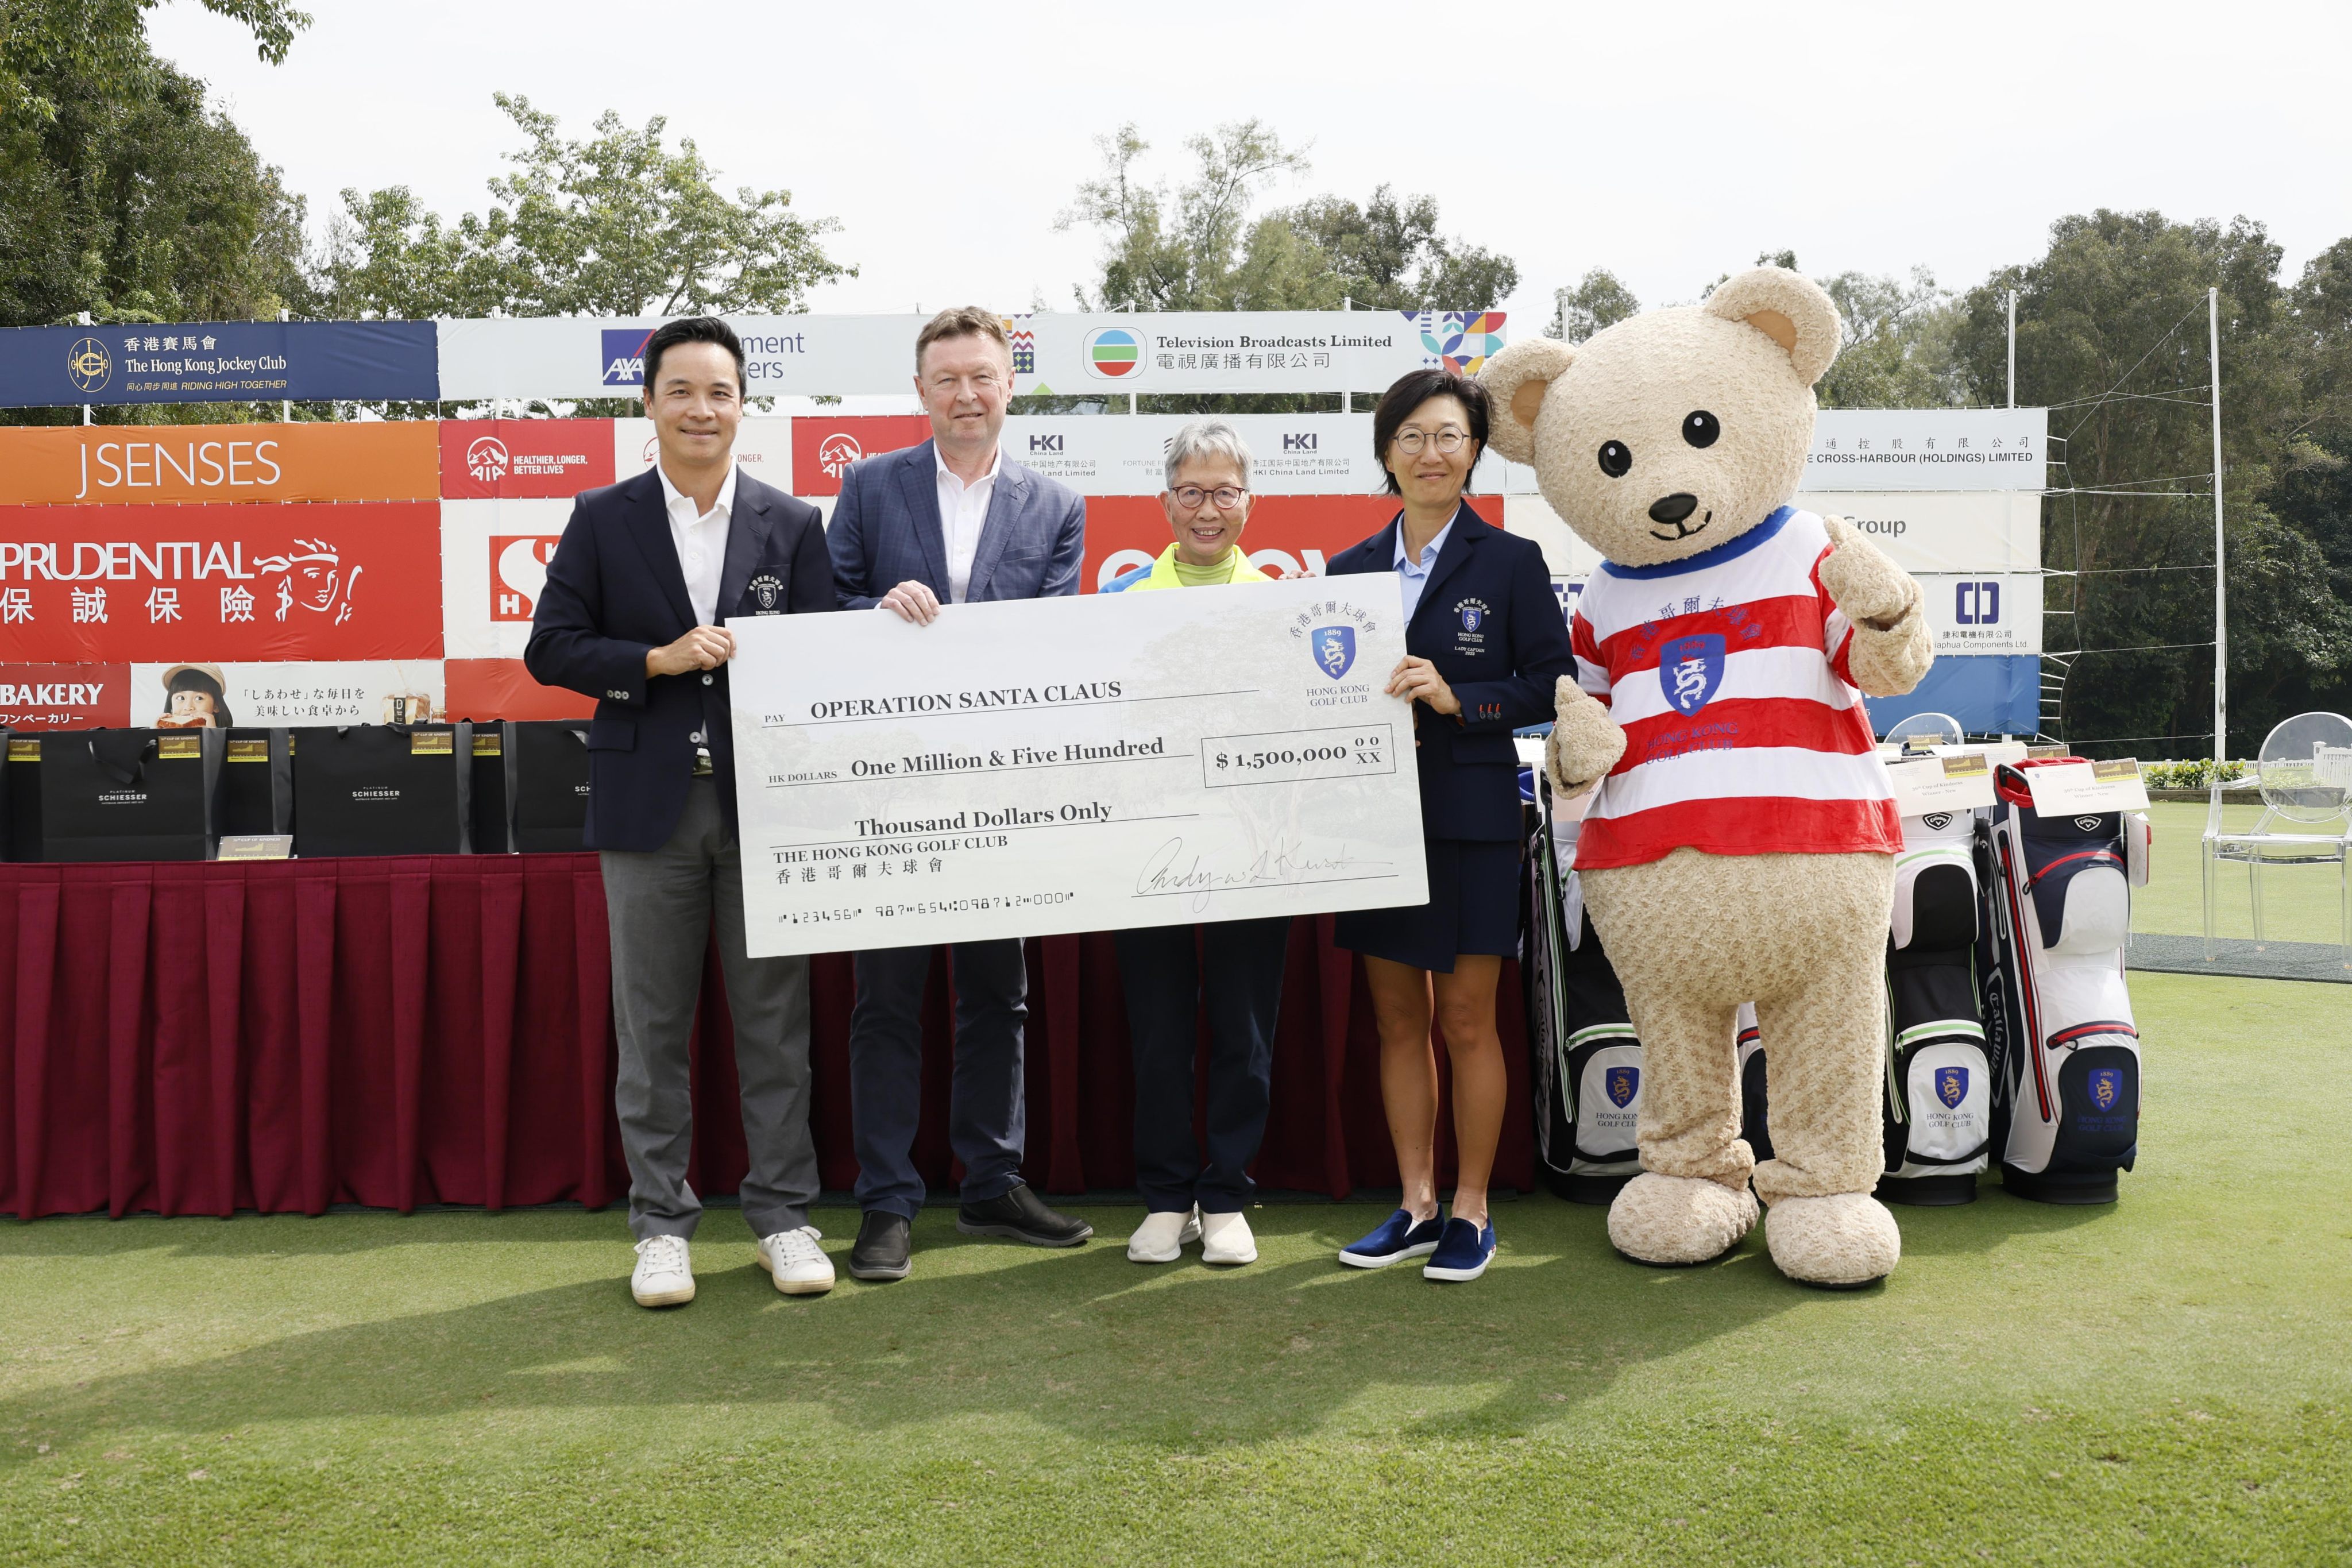 The Hong Kong Golf Club partnered with Operation Santa Claus to host the Cup of Kindness charity game. Photo: Handout